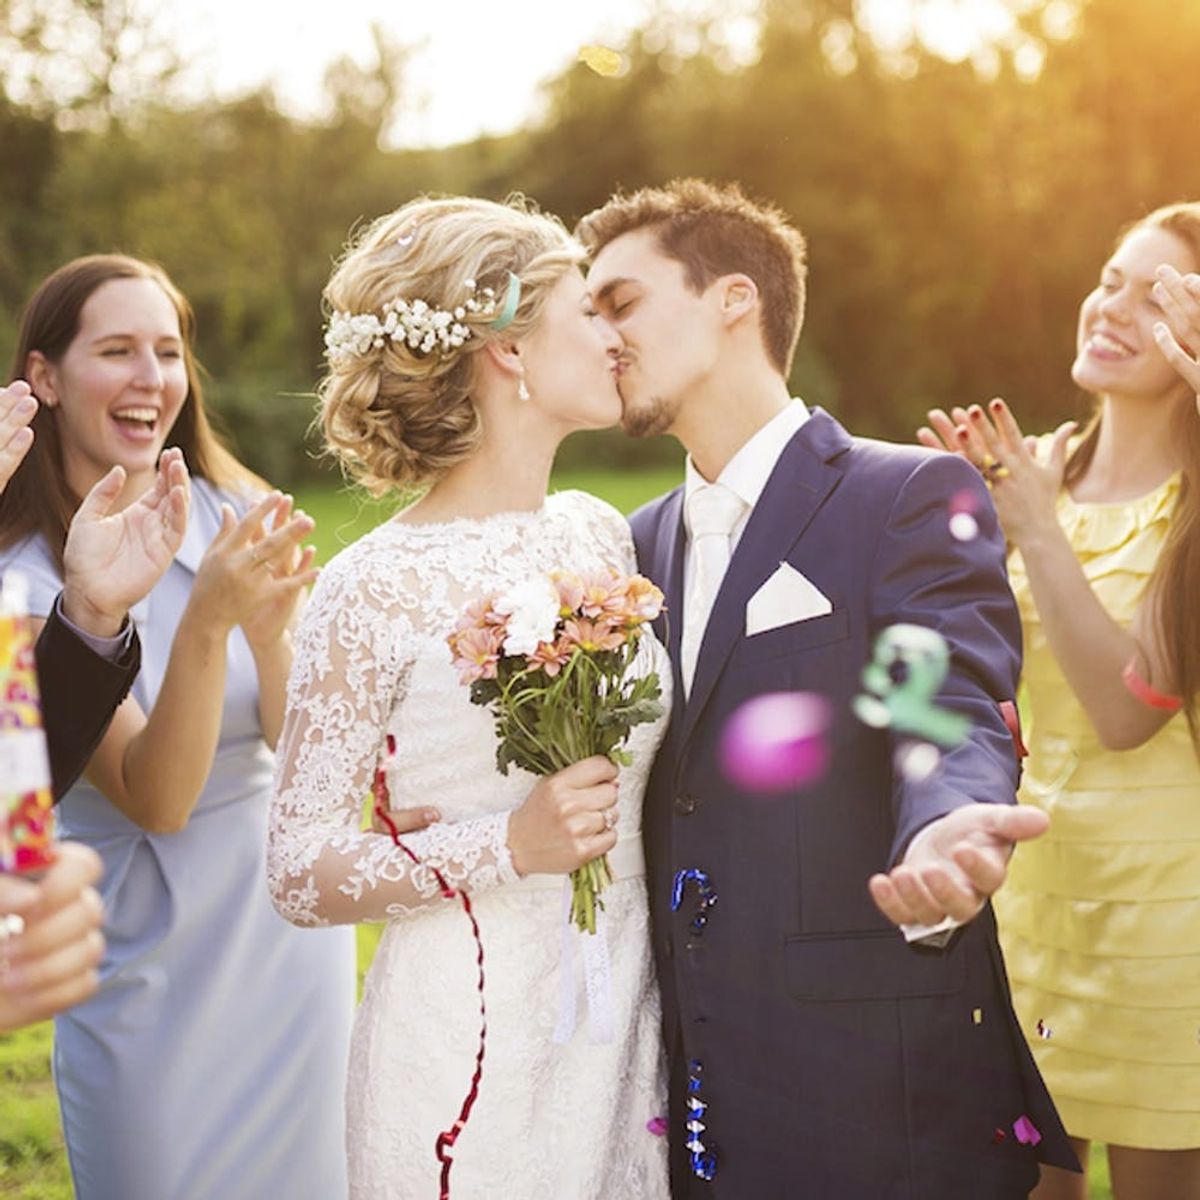 10 Things Couples Wish They Knew *Before* They Got Married